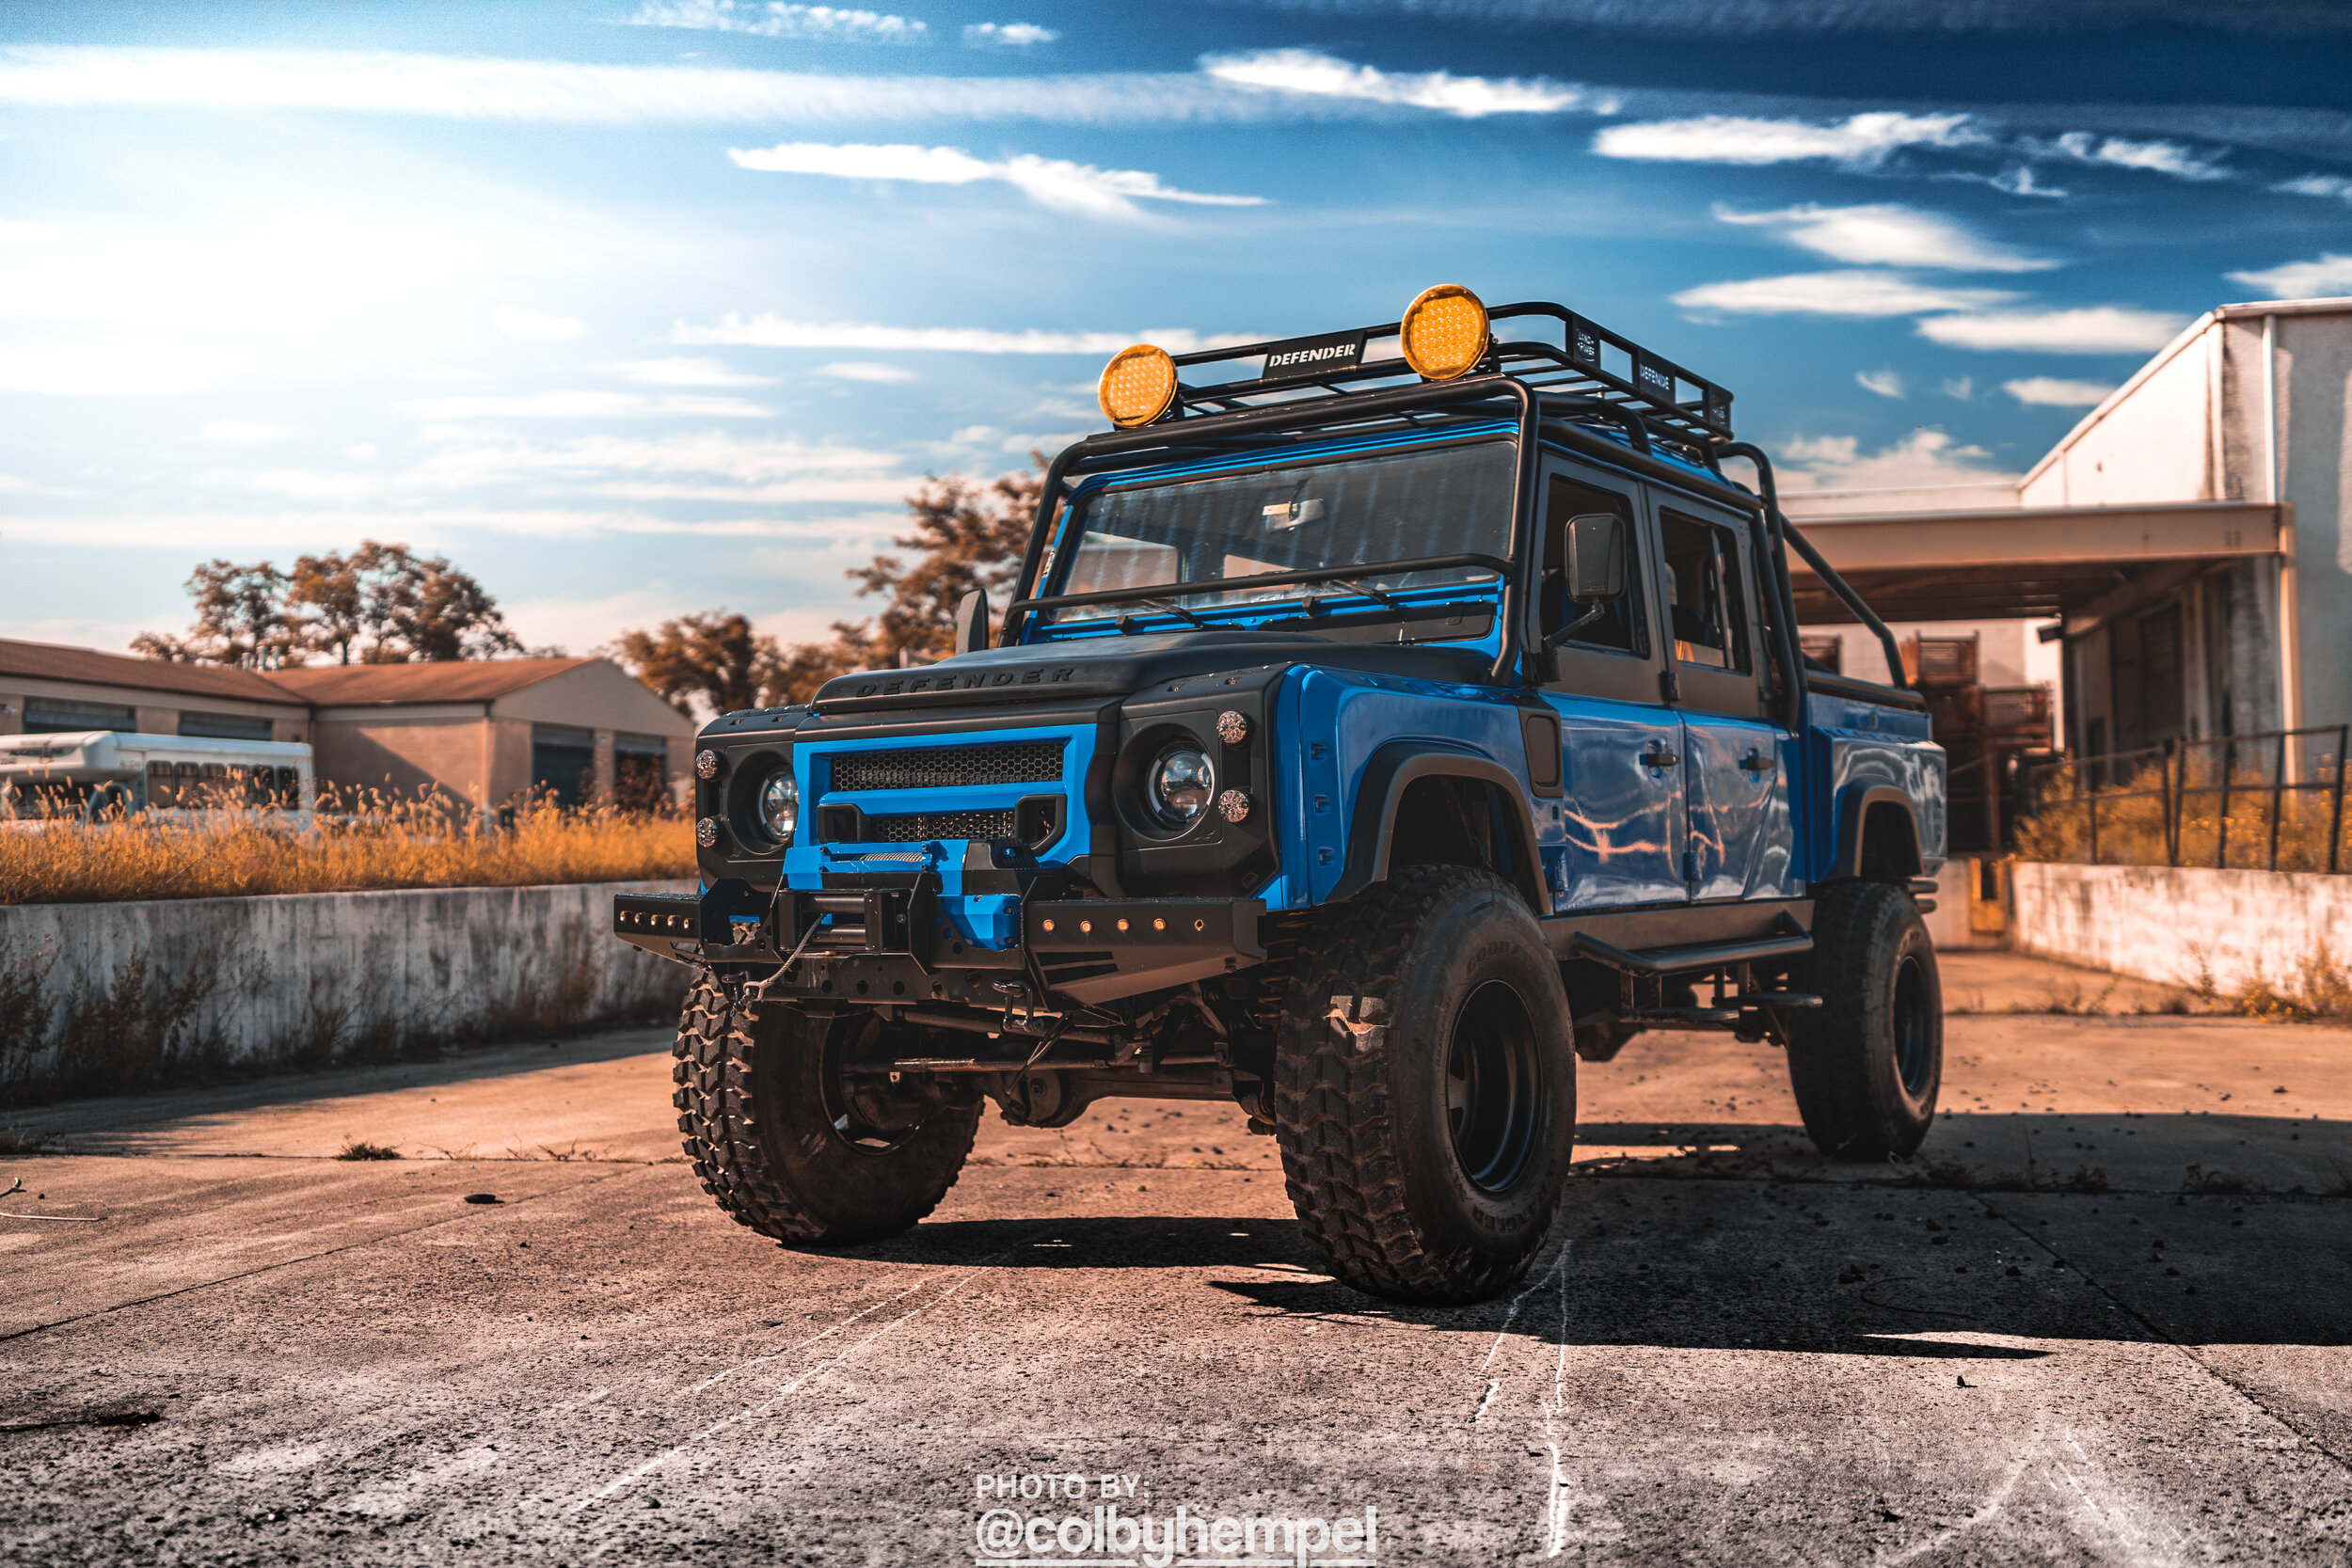 Land Rover Defender 130 roars in India, an off-road adventurer